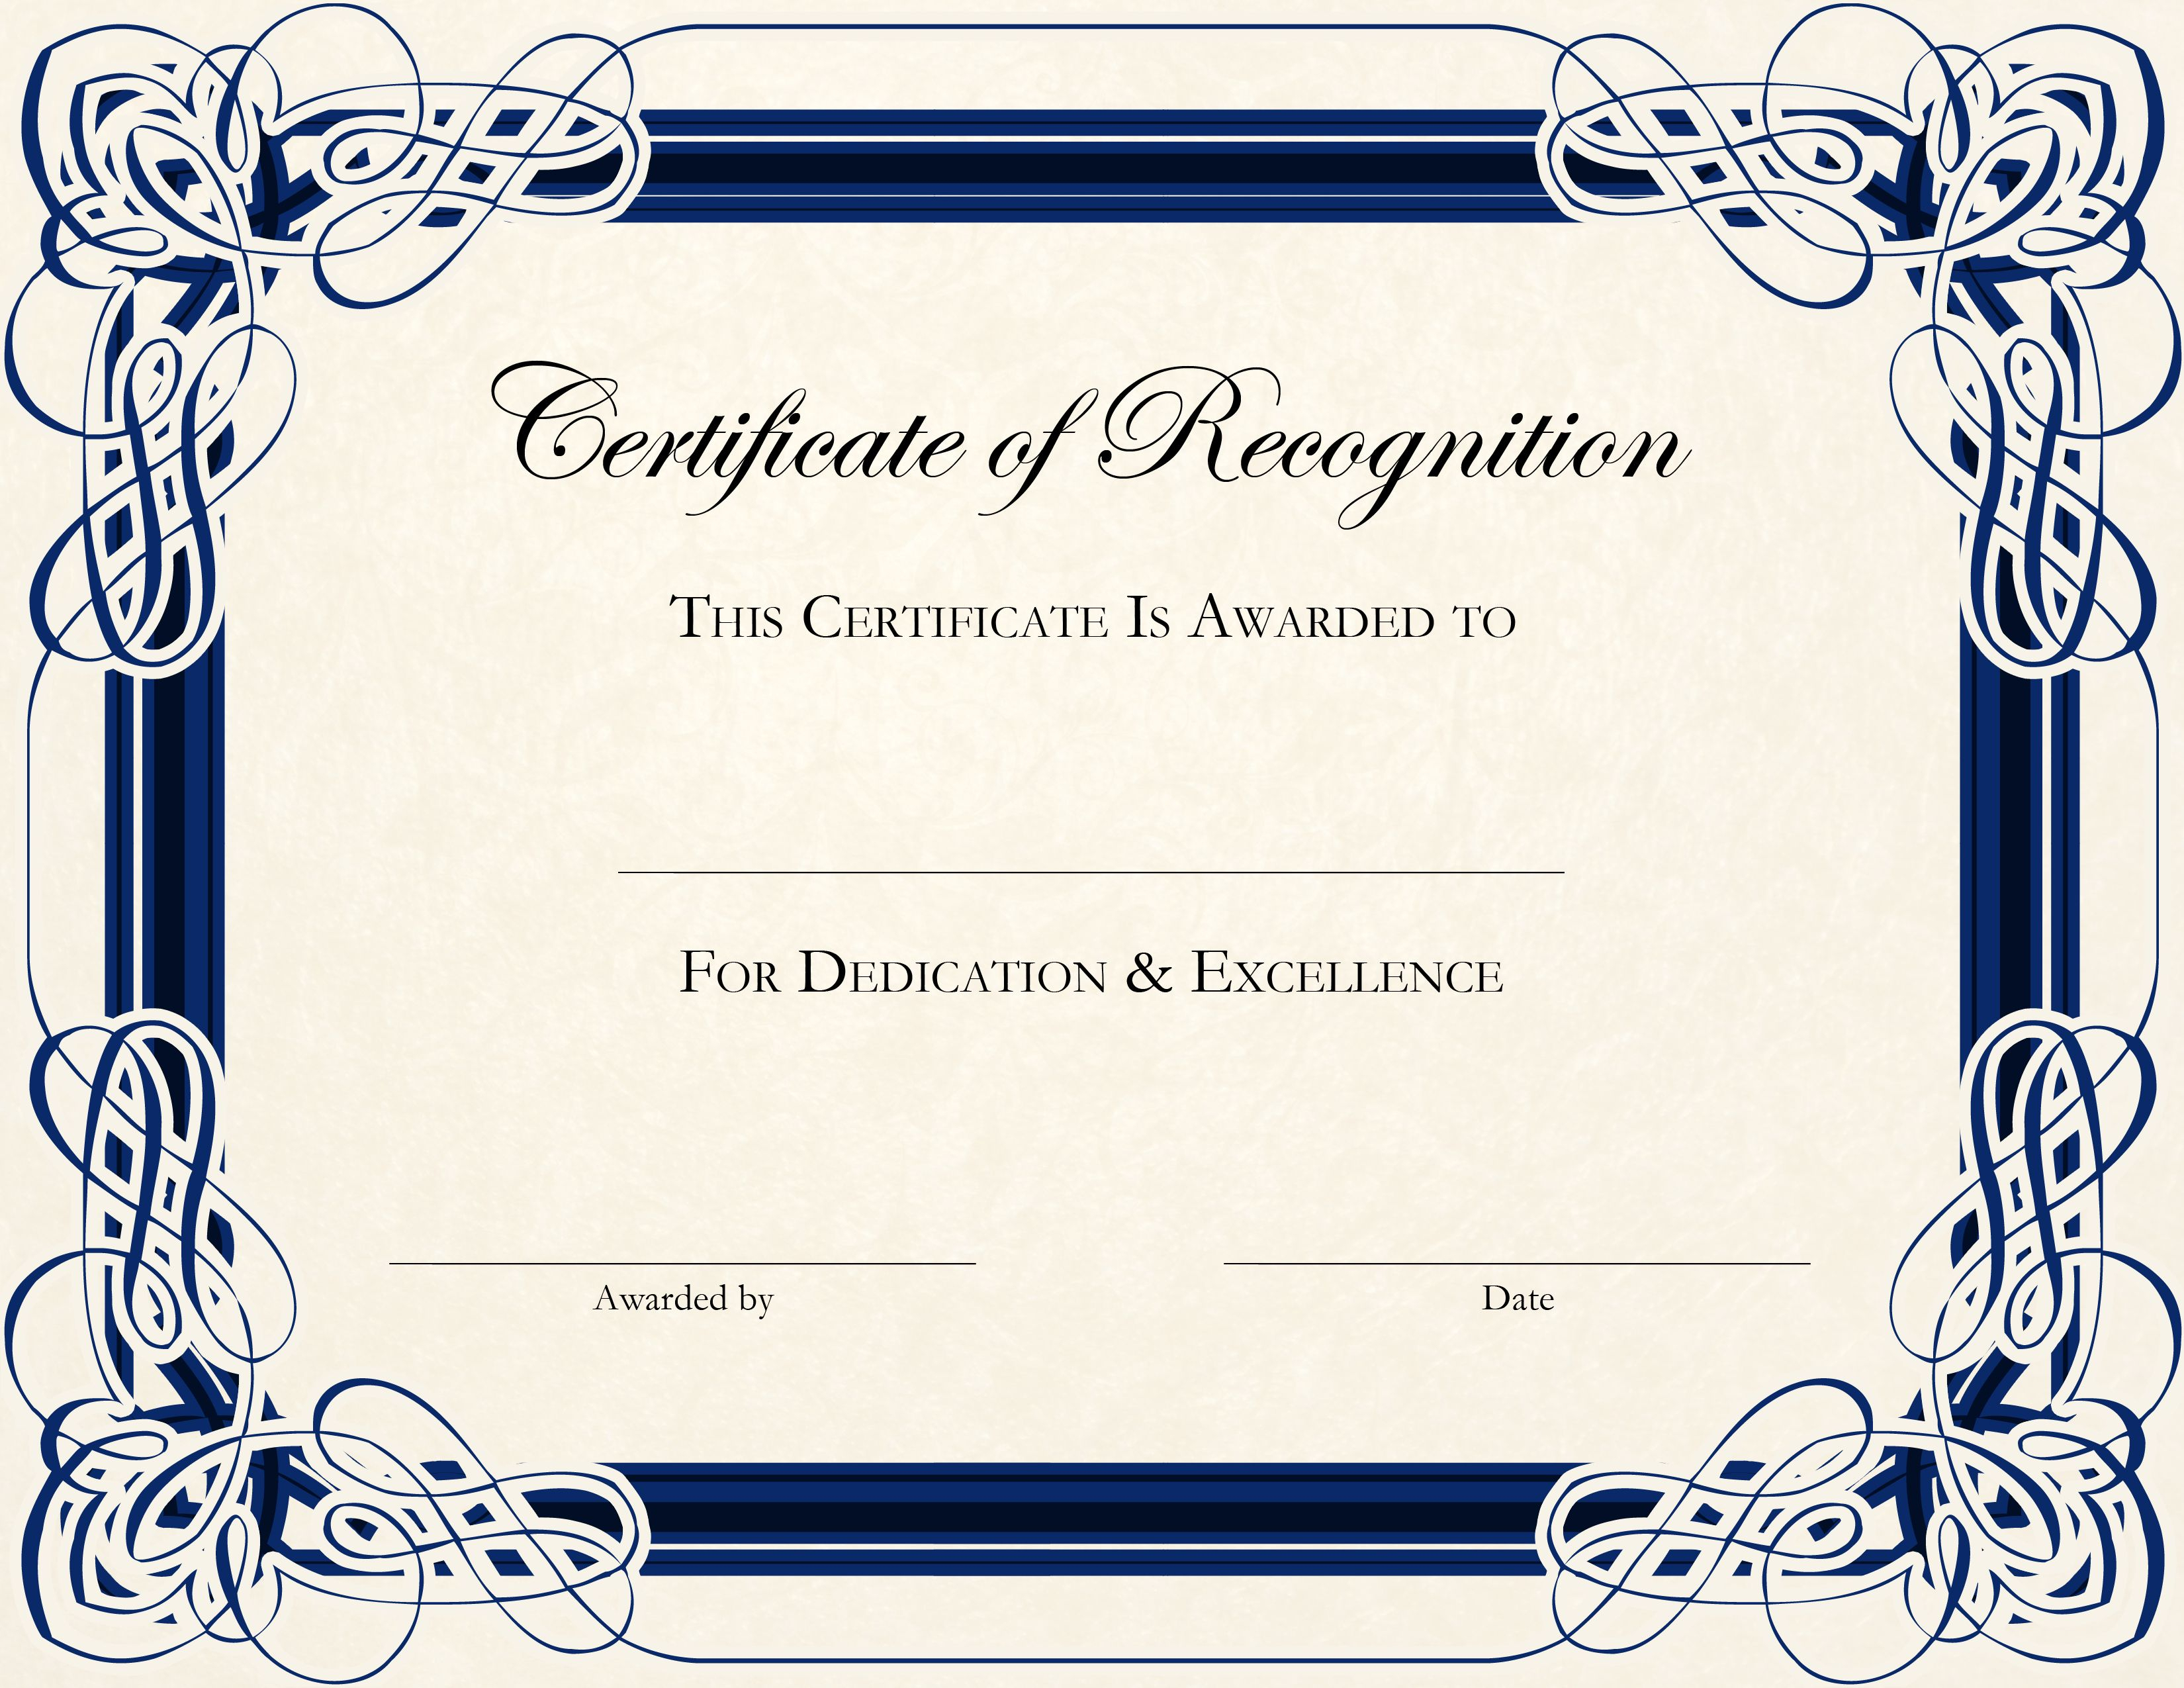 Certificate Template Designs Recognition Docs | Blankets Pertaining To Certificate Of Appreciation Template Free Printable